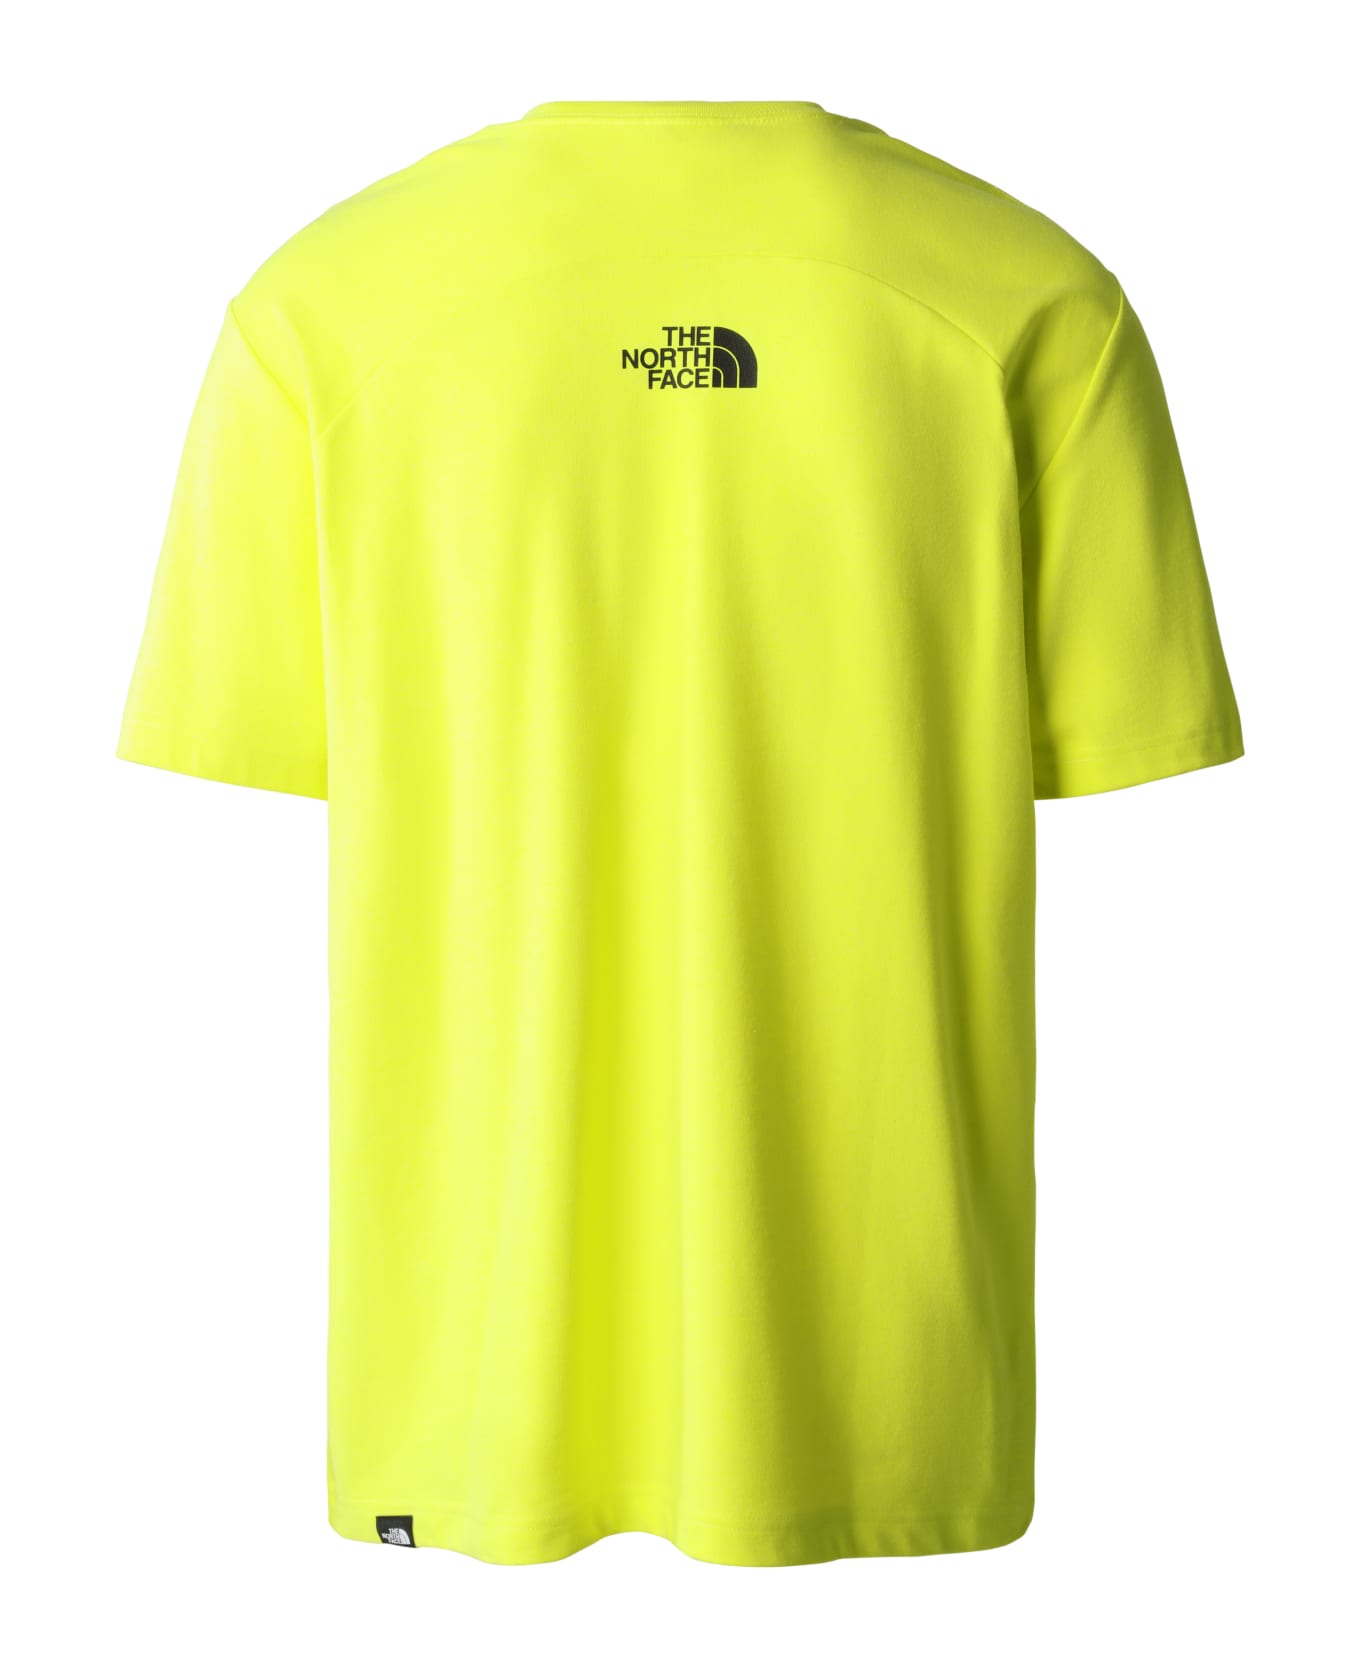 The North Face M Graphic T Shirt - Led Yellow